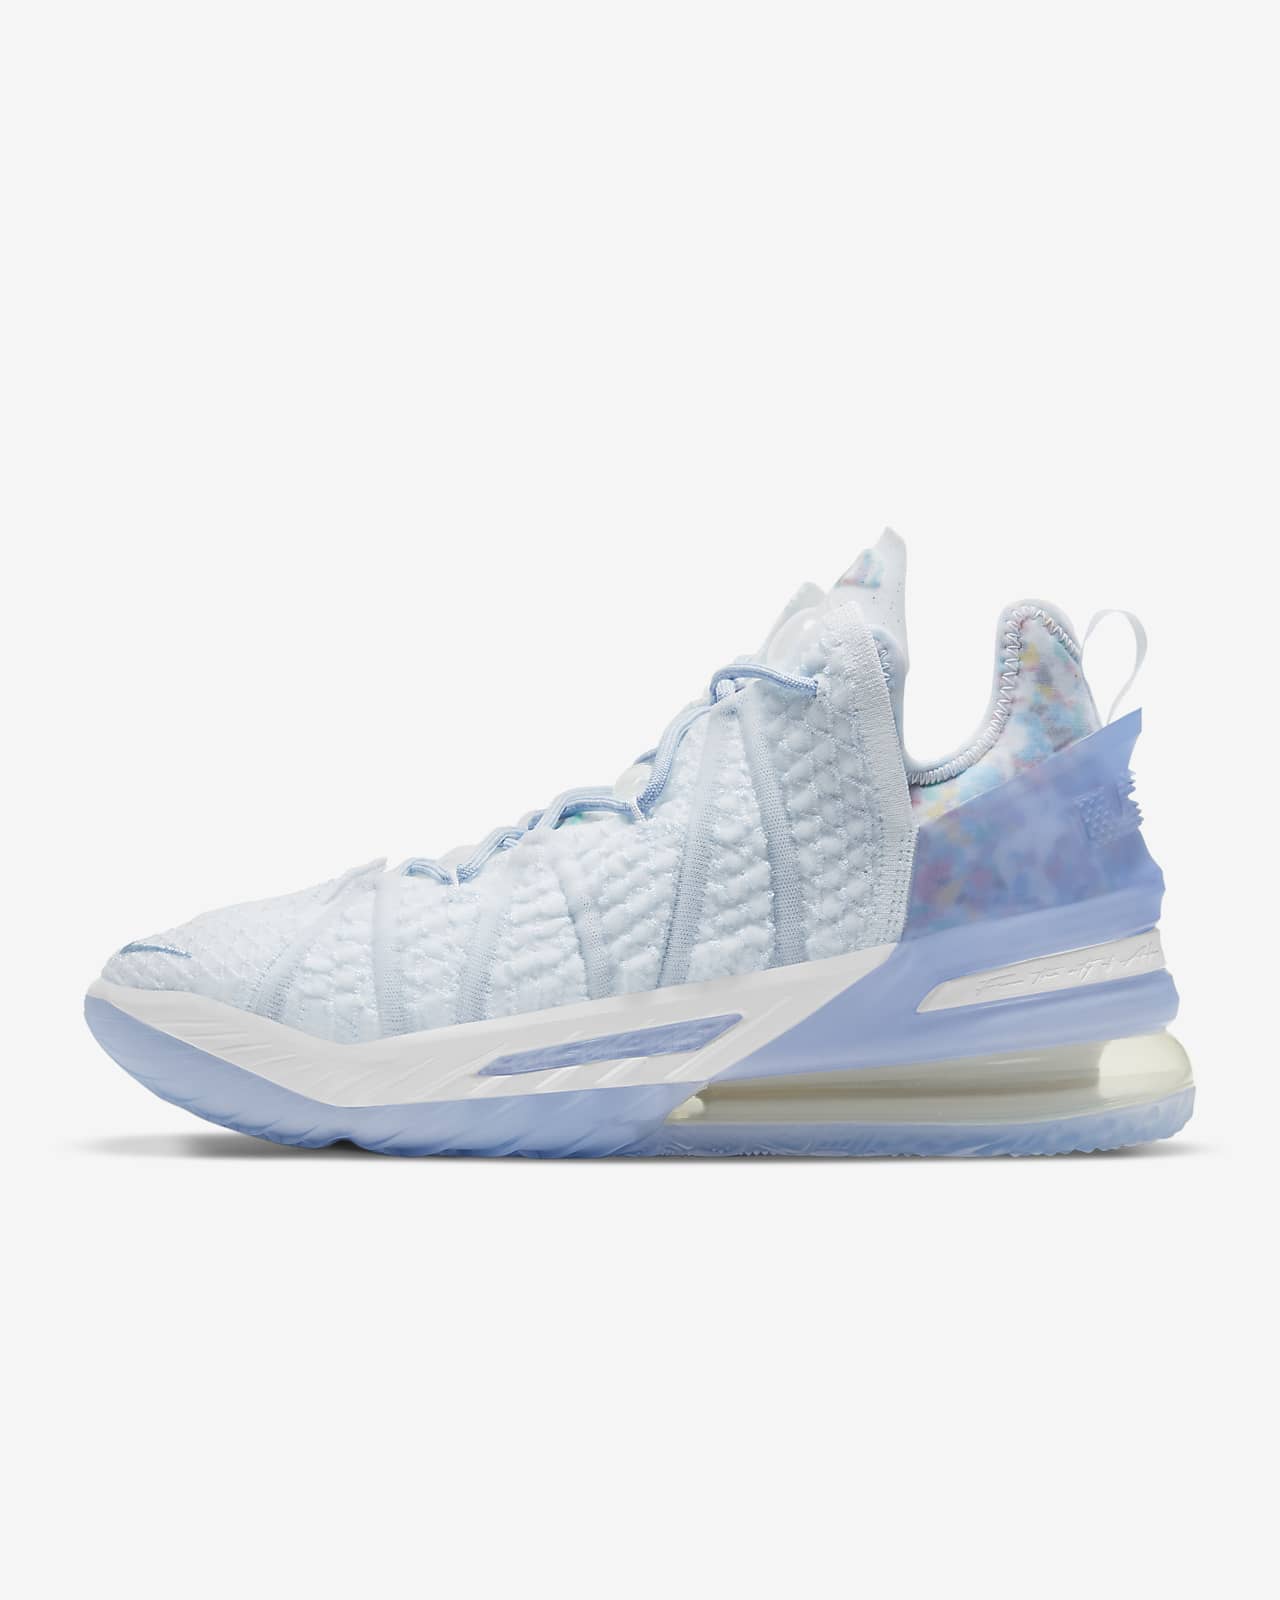 Mindre end boble Besætte LeBron 18 "Play for the Future" Basketball Shoes. Nike JP